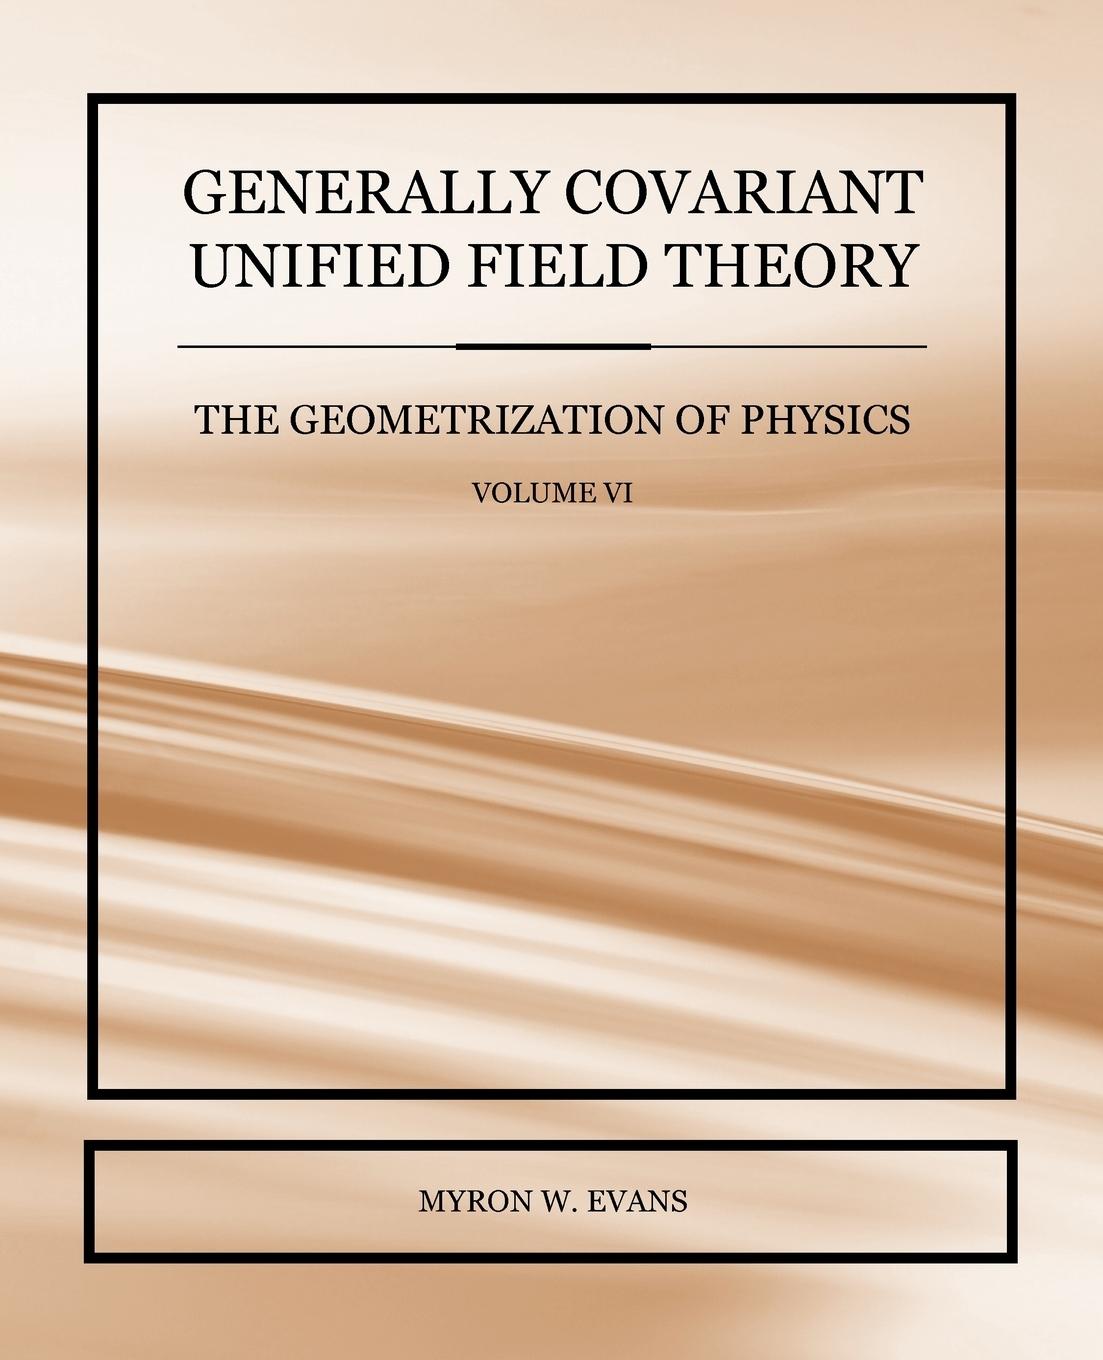 Generally Covariant Unified Field Theory - The Geometrization of Physics - Volume VI - Evans, Myron W